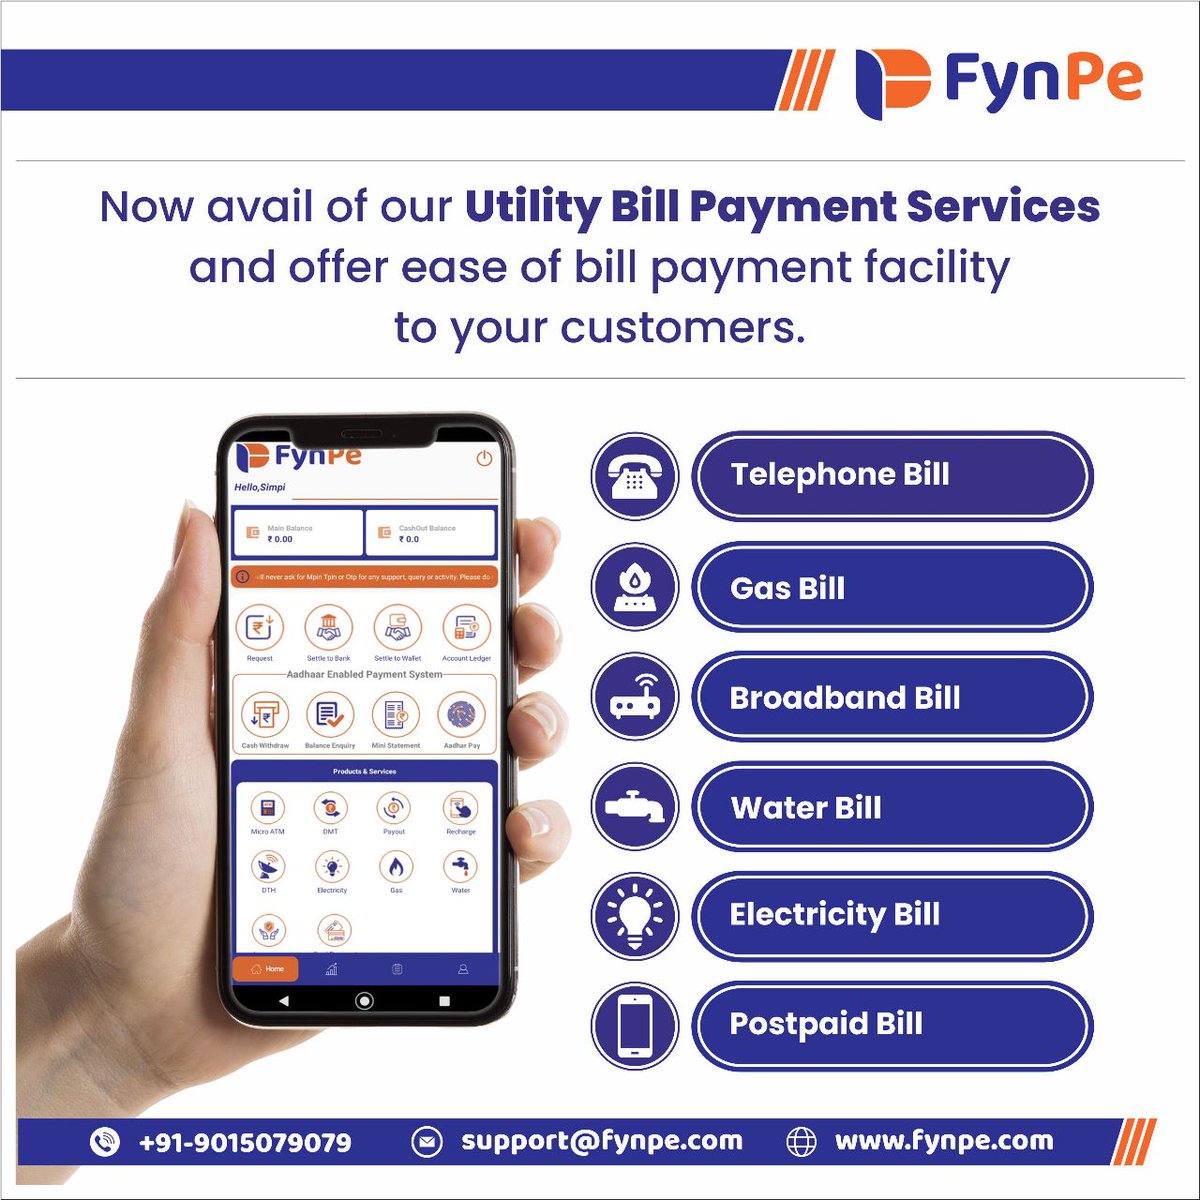 Make bill payments easy for your customers by offering Utility Bill Payment Services at your shop. Call us and get started !
#BillPay
#UtilityPayments
#PayYourBills
#ConvenientPayments
#EasyBillPayment
#UtilityBillSolutions
#QuickPay
#OnlineBillPayment
#EfficientPayments
#fynpe